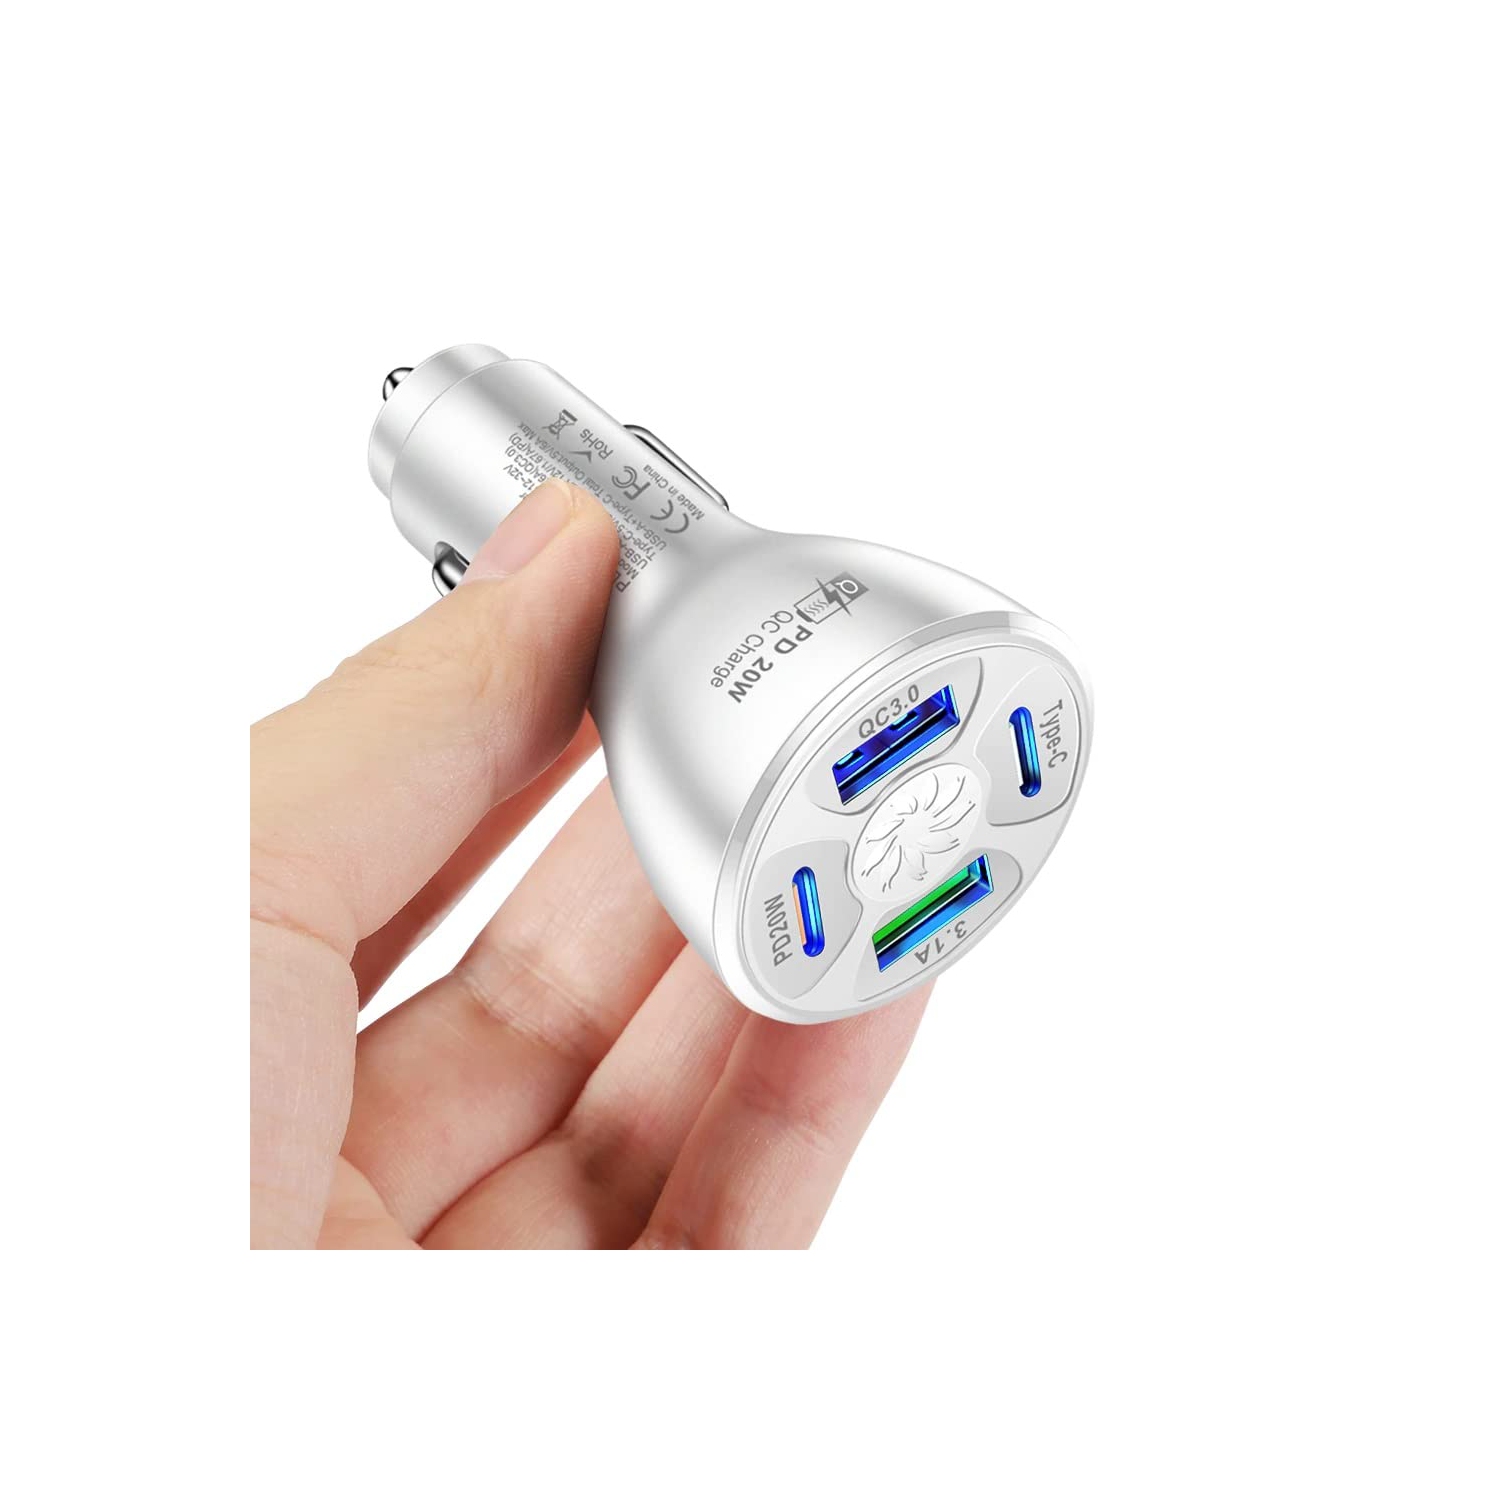 2 Pack of USB Fast Car Charger USB Type C / PD Fast Charger 20W 4 Port Multi-Functional Charger Power Adapter Compatible with iPad iPhone and Android Cell Phone and Tablet